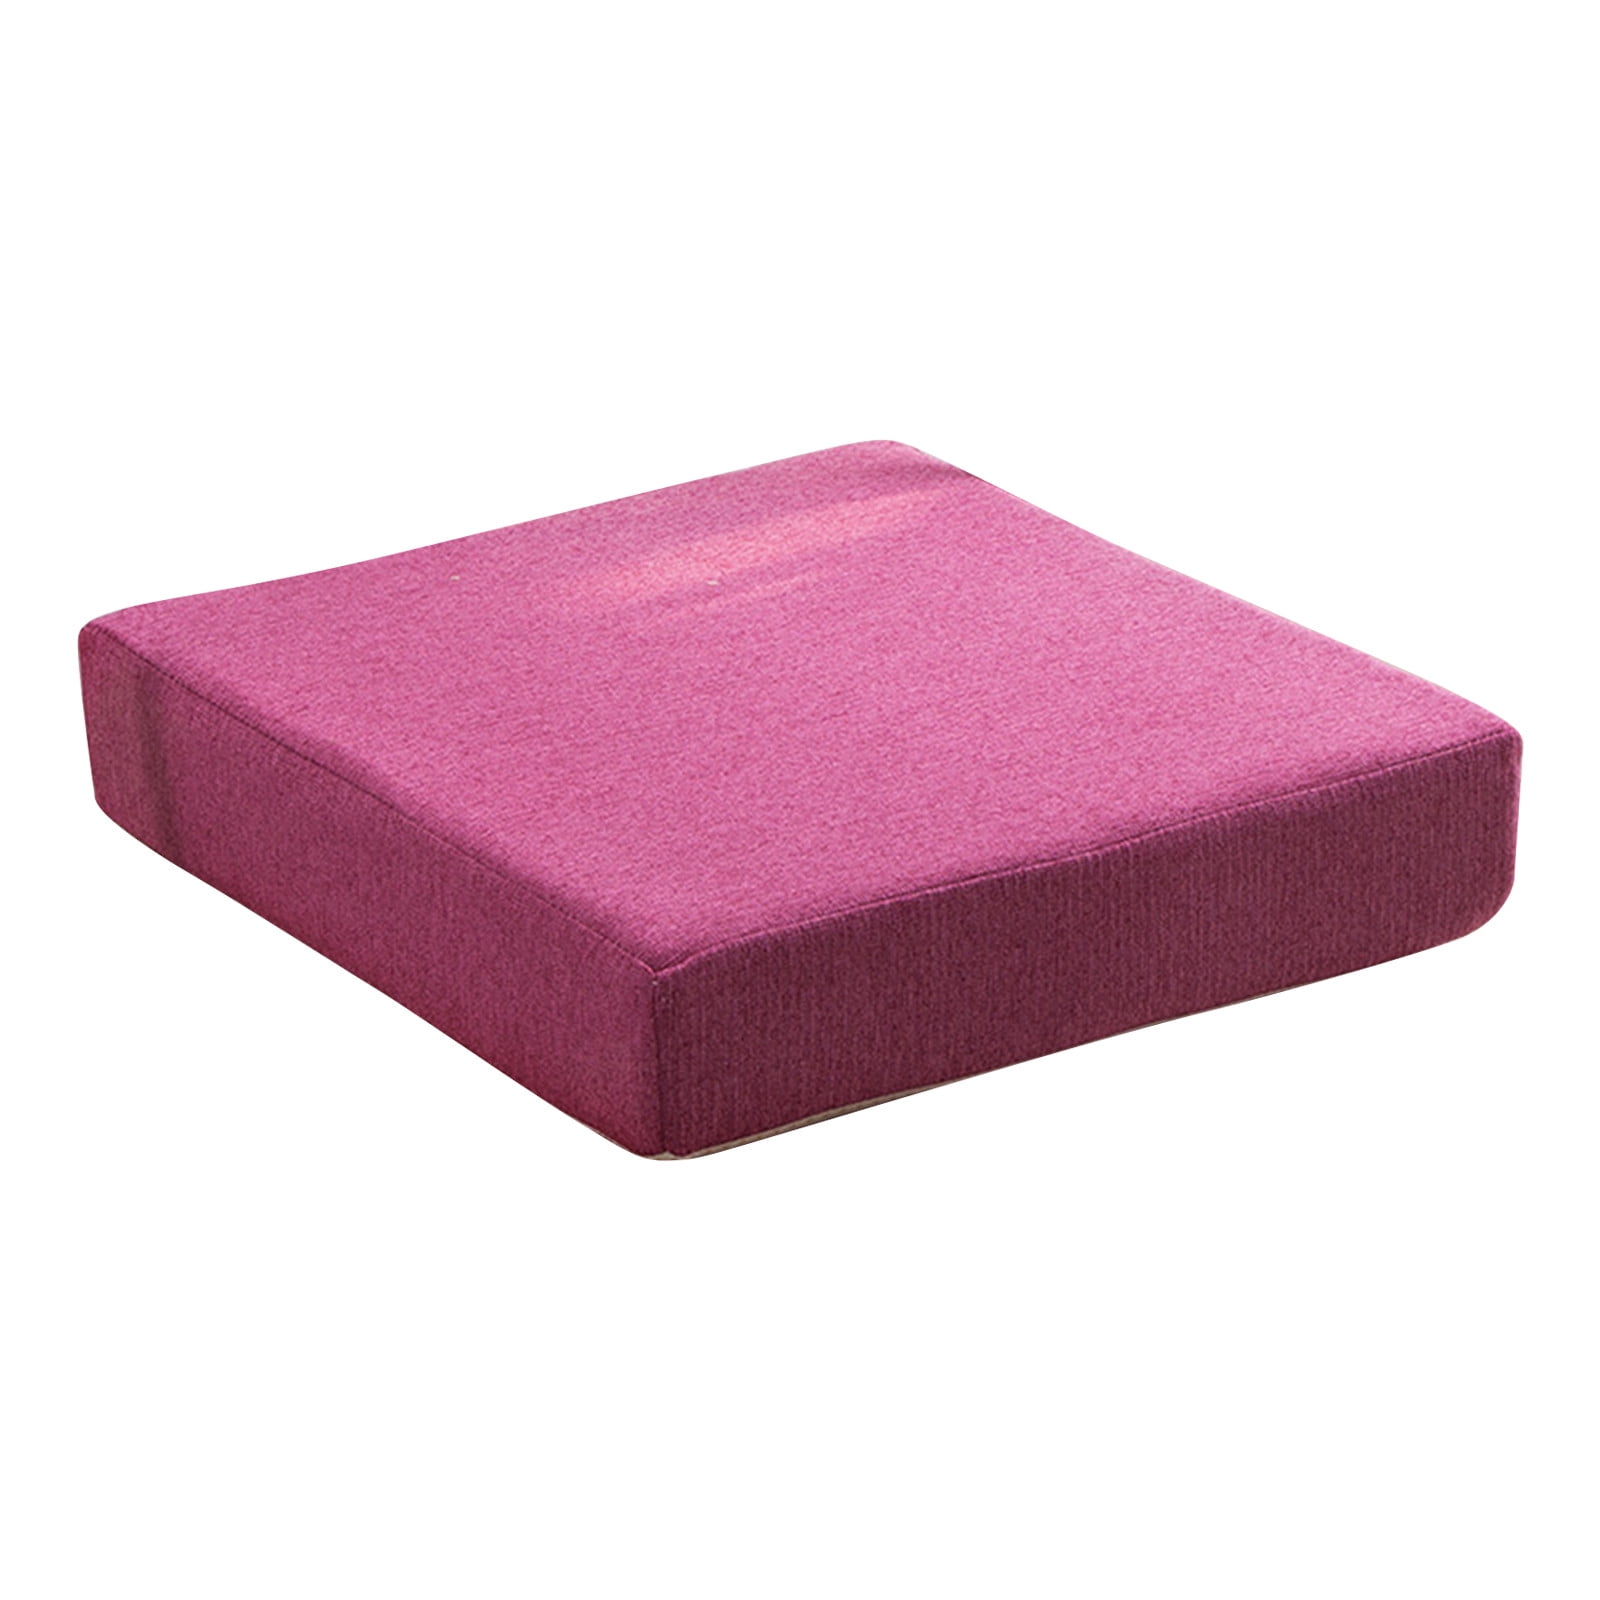 Chair PadsSponge Comfort and Softness Yoga Chairs Plane Seat Cushion 25 X  25 Cushions 35 Inch Bench Cushion Seat Pads for Bleachers Board to Put  under